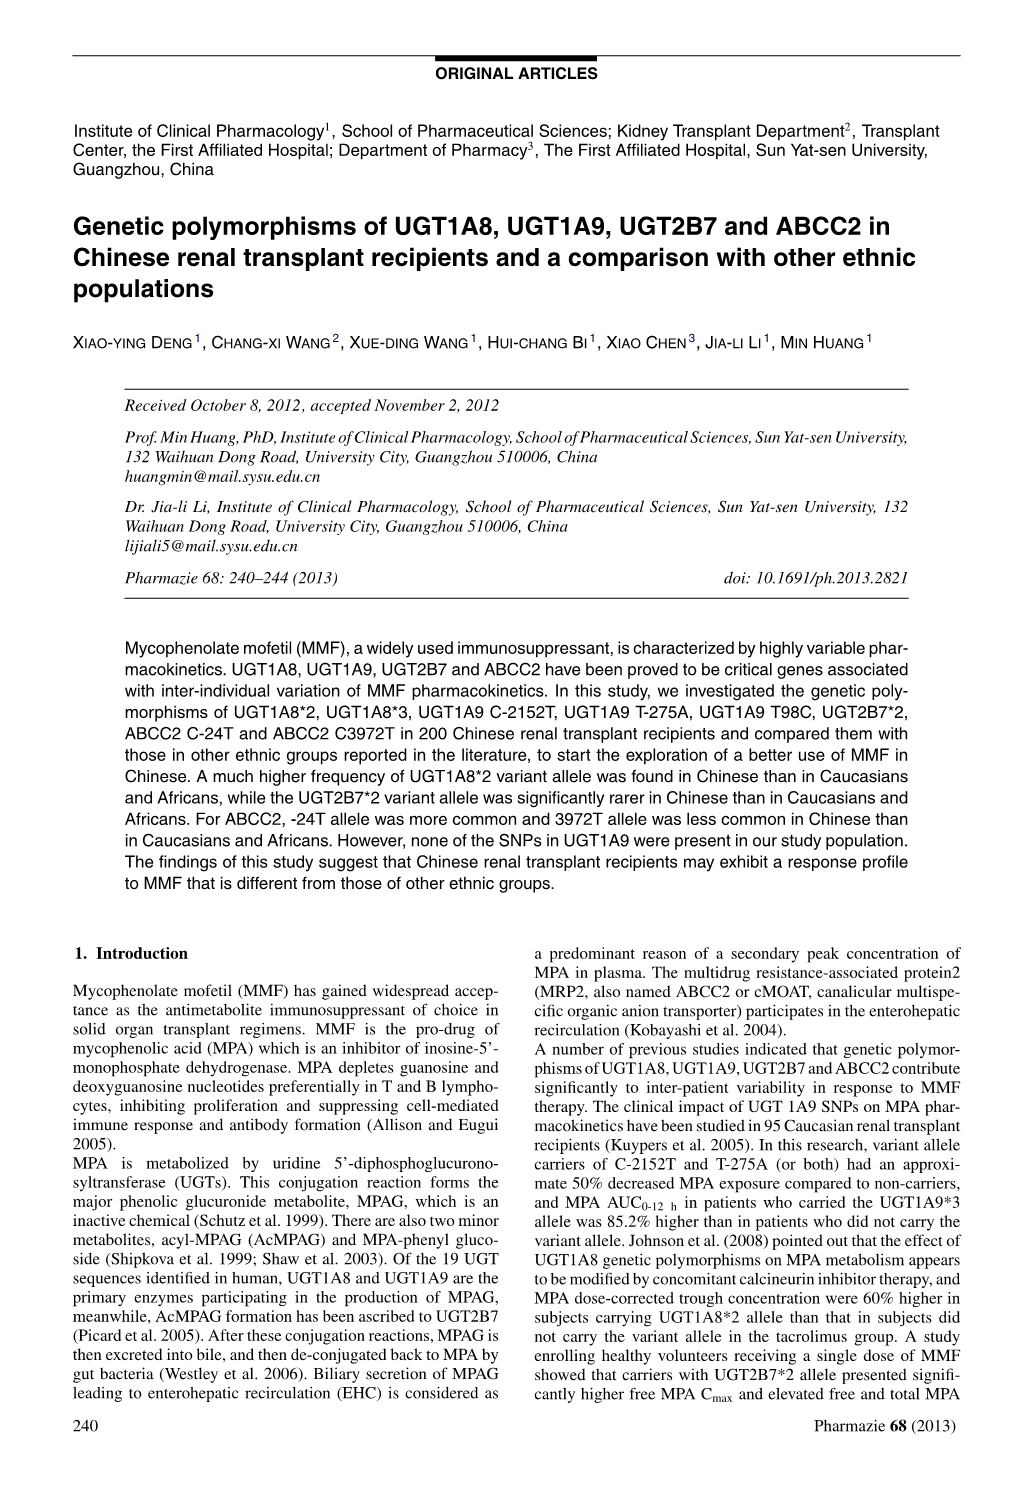 Genetic Polymorphisms of UGT1A8, UGT1A9, UGT2B7 and ABCC2 in Chinese Renal Transplant Recipients and a Comparison with Other Ethnic Populations